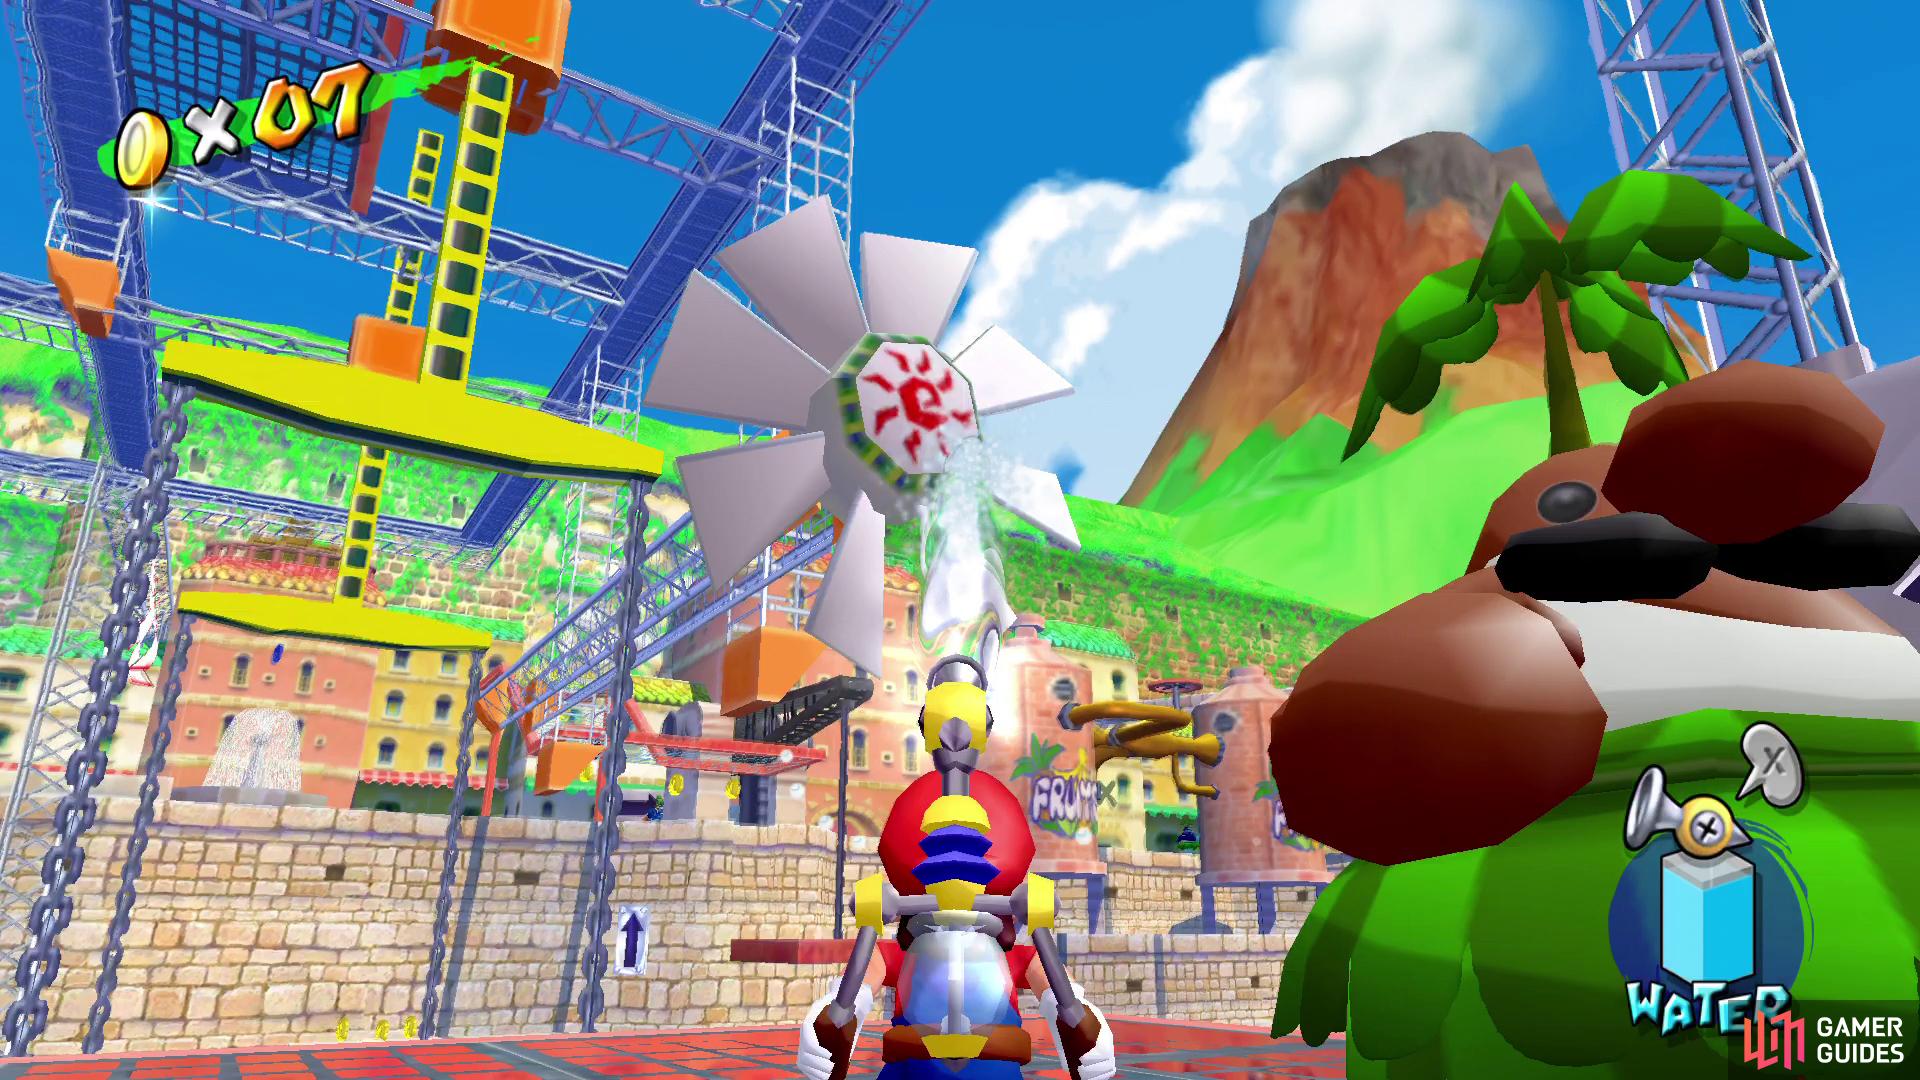 Spray the propeller with your FLUDD